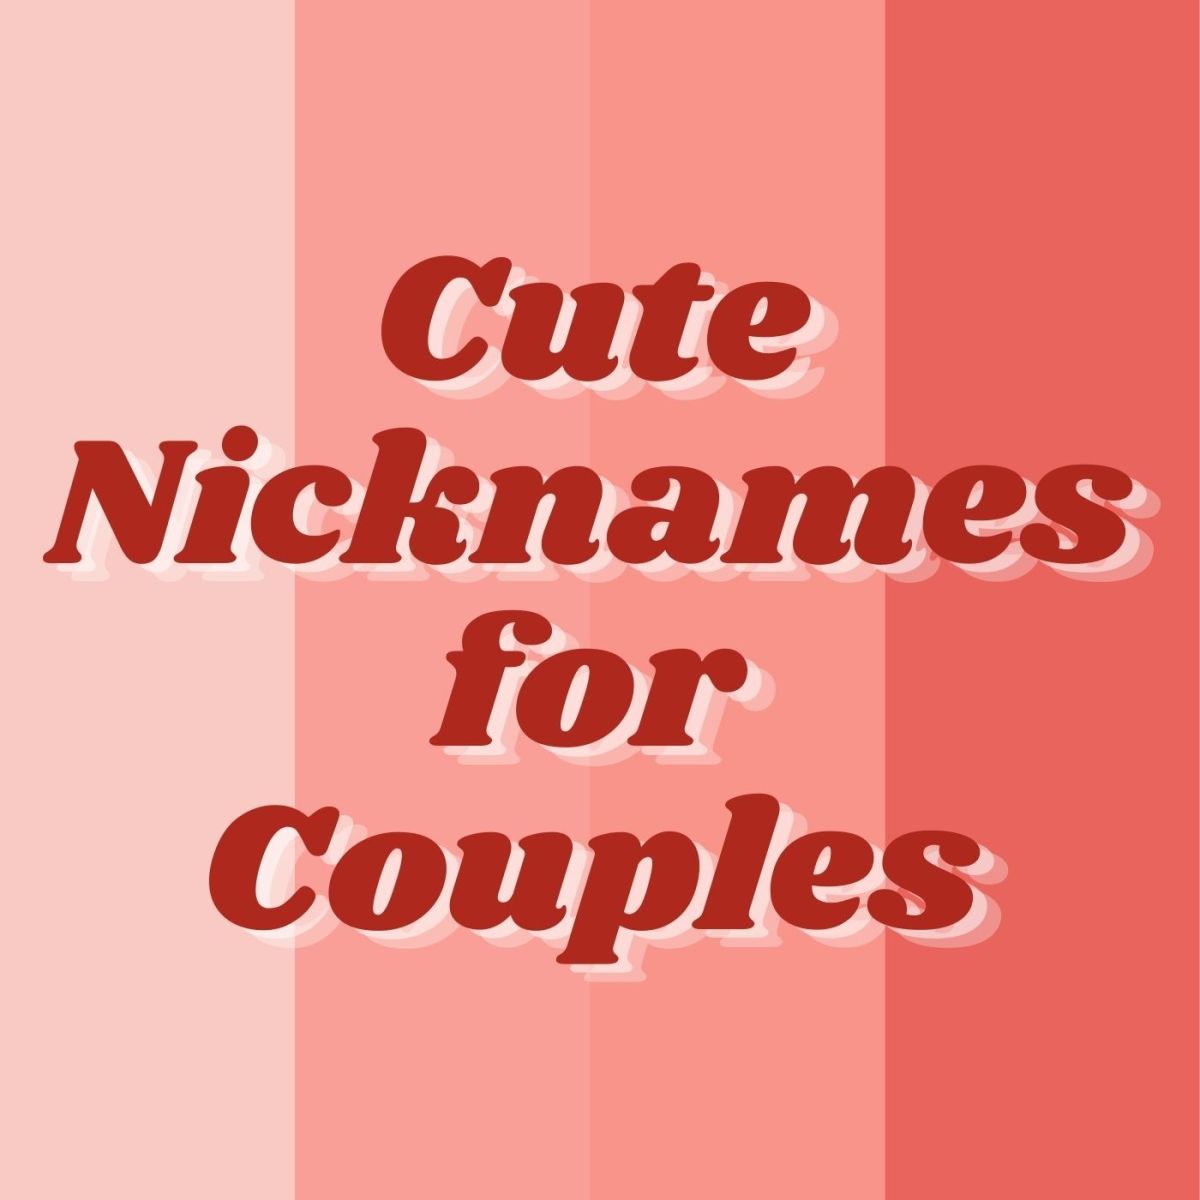 Need a cute new pet name for your boyfriend or girlfriend? Look no further!